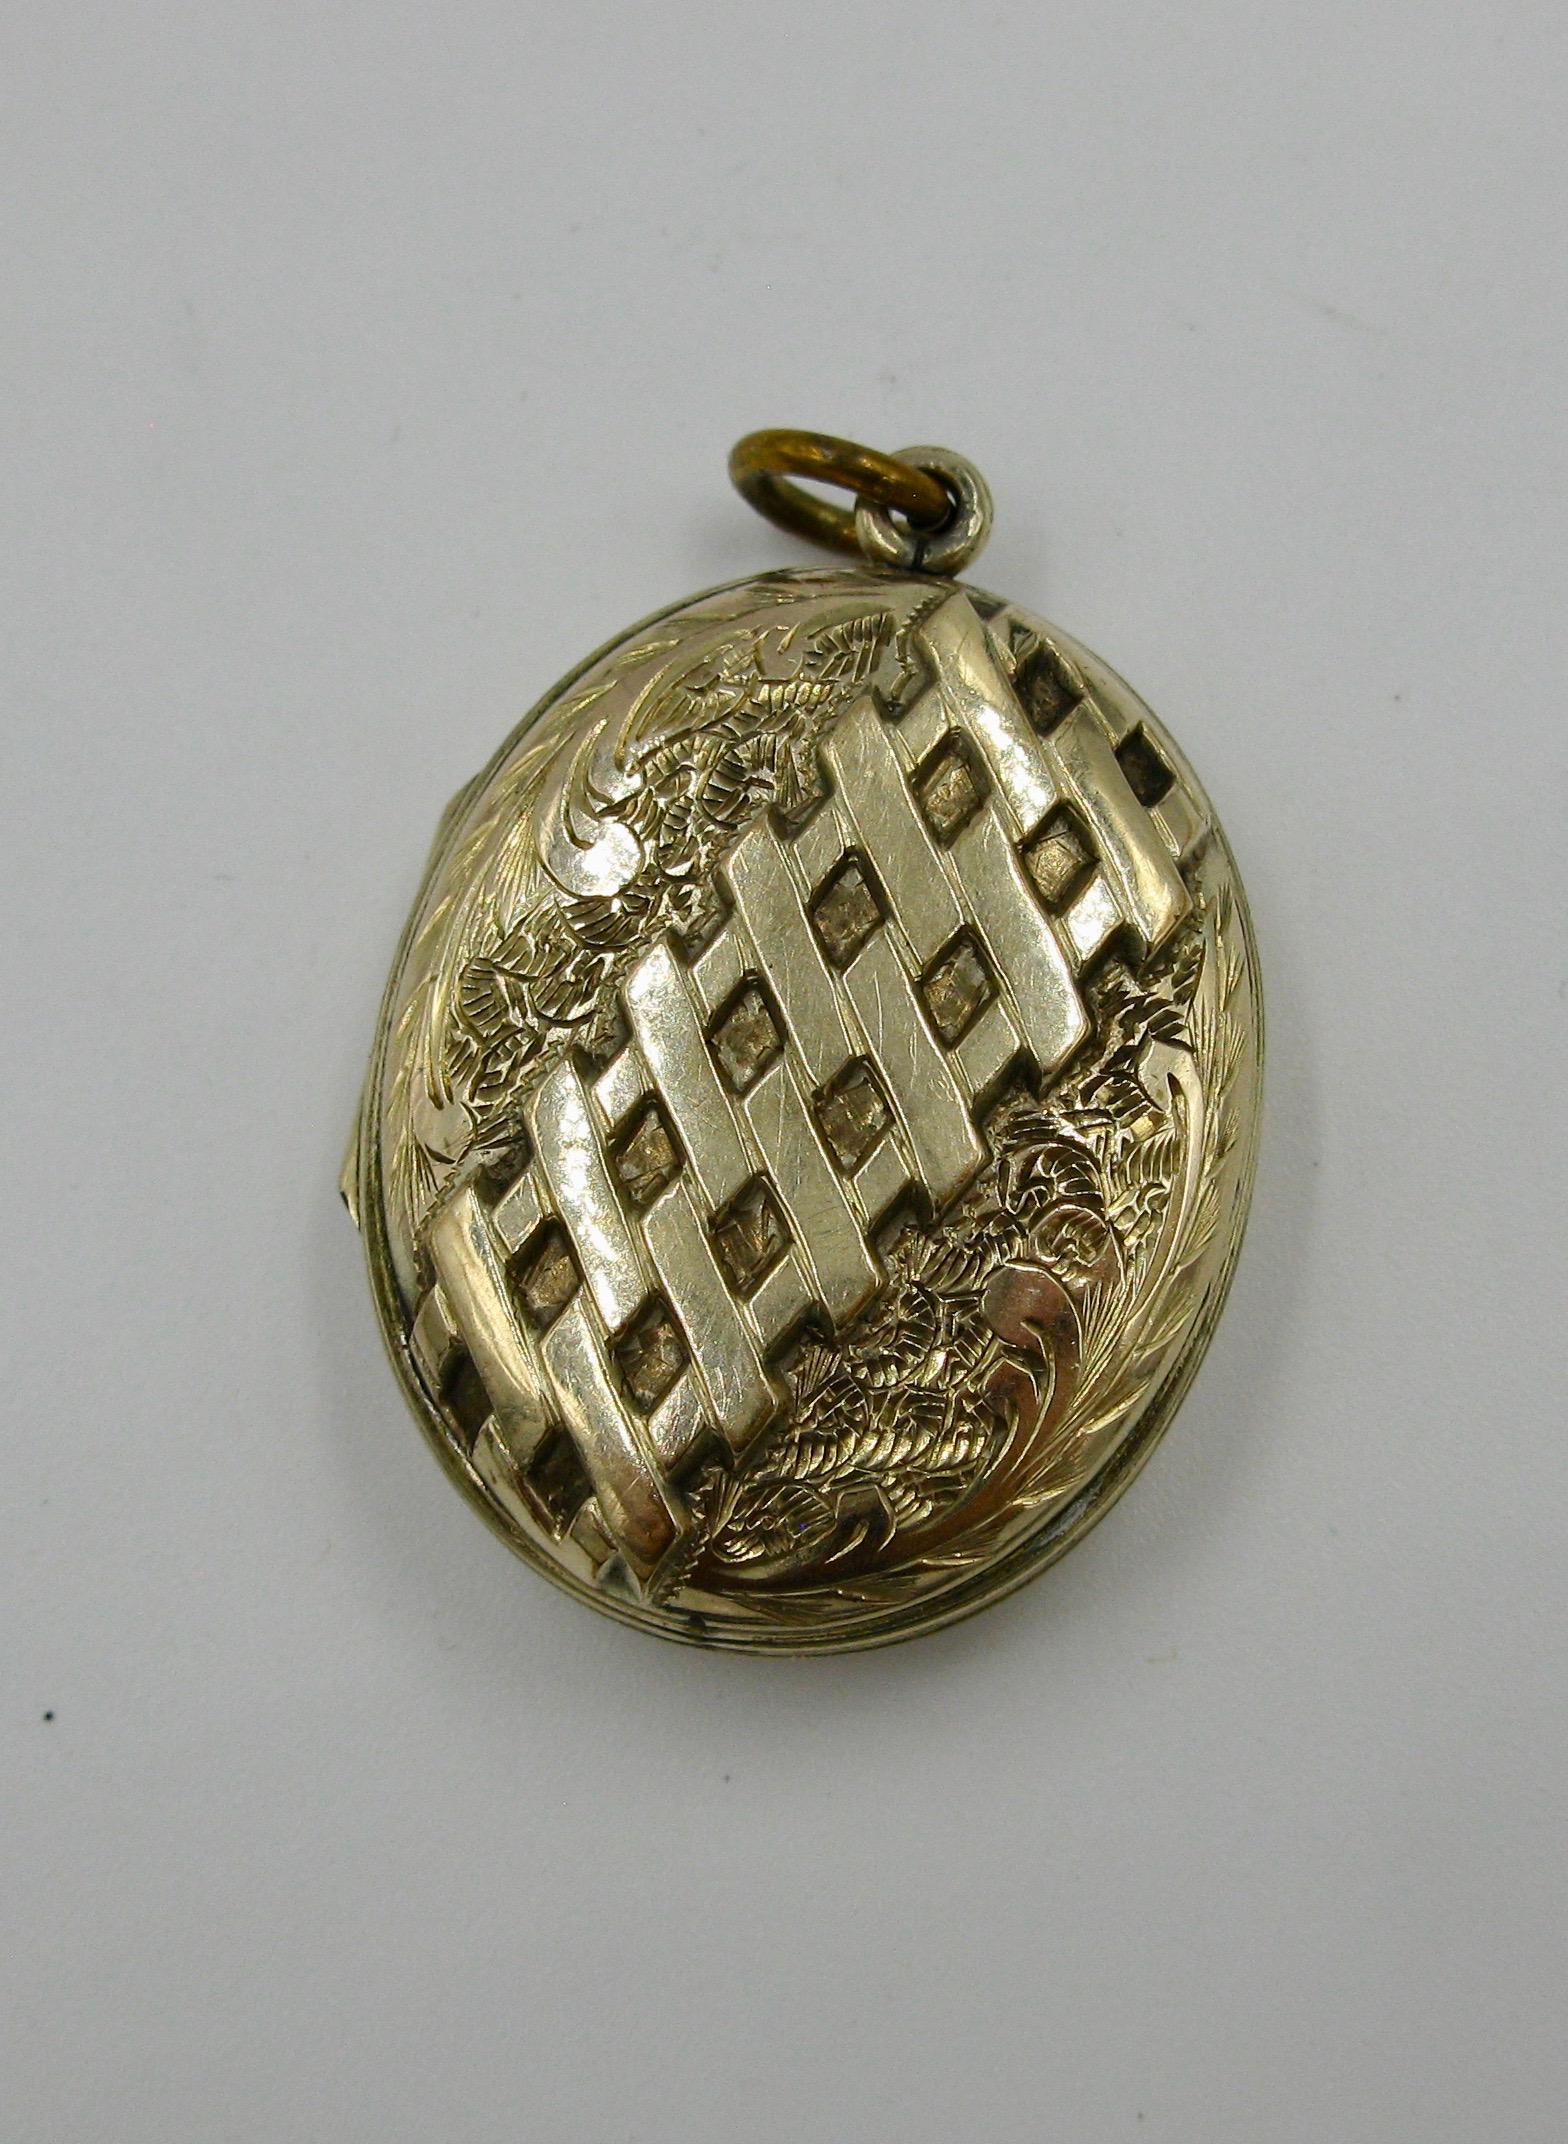 A GORGEOUS VICTORIAN BELLE EPOQUE PICTURE LOCKET PENDANT IN WARM 9K ROSE GOLD WITH BEAUTIFUL FLOWER MOTIF ENGRAVING AND A LATTICE WORK DESIGN - A PERFECT SIZE - 1 5/8 INCHES LONG!
This is just a stunning Victorian Belle Epoque picture locket!  It is